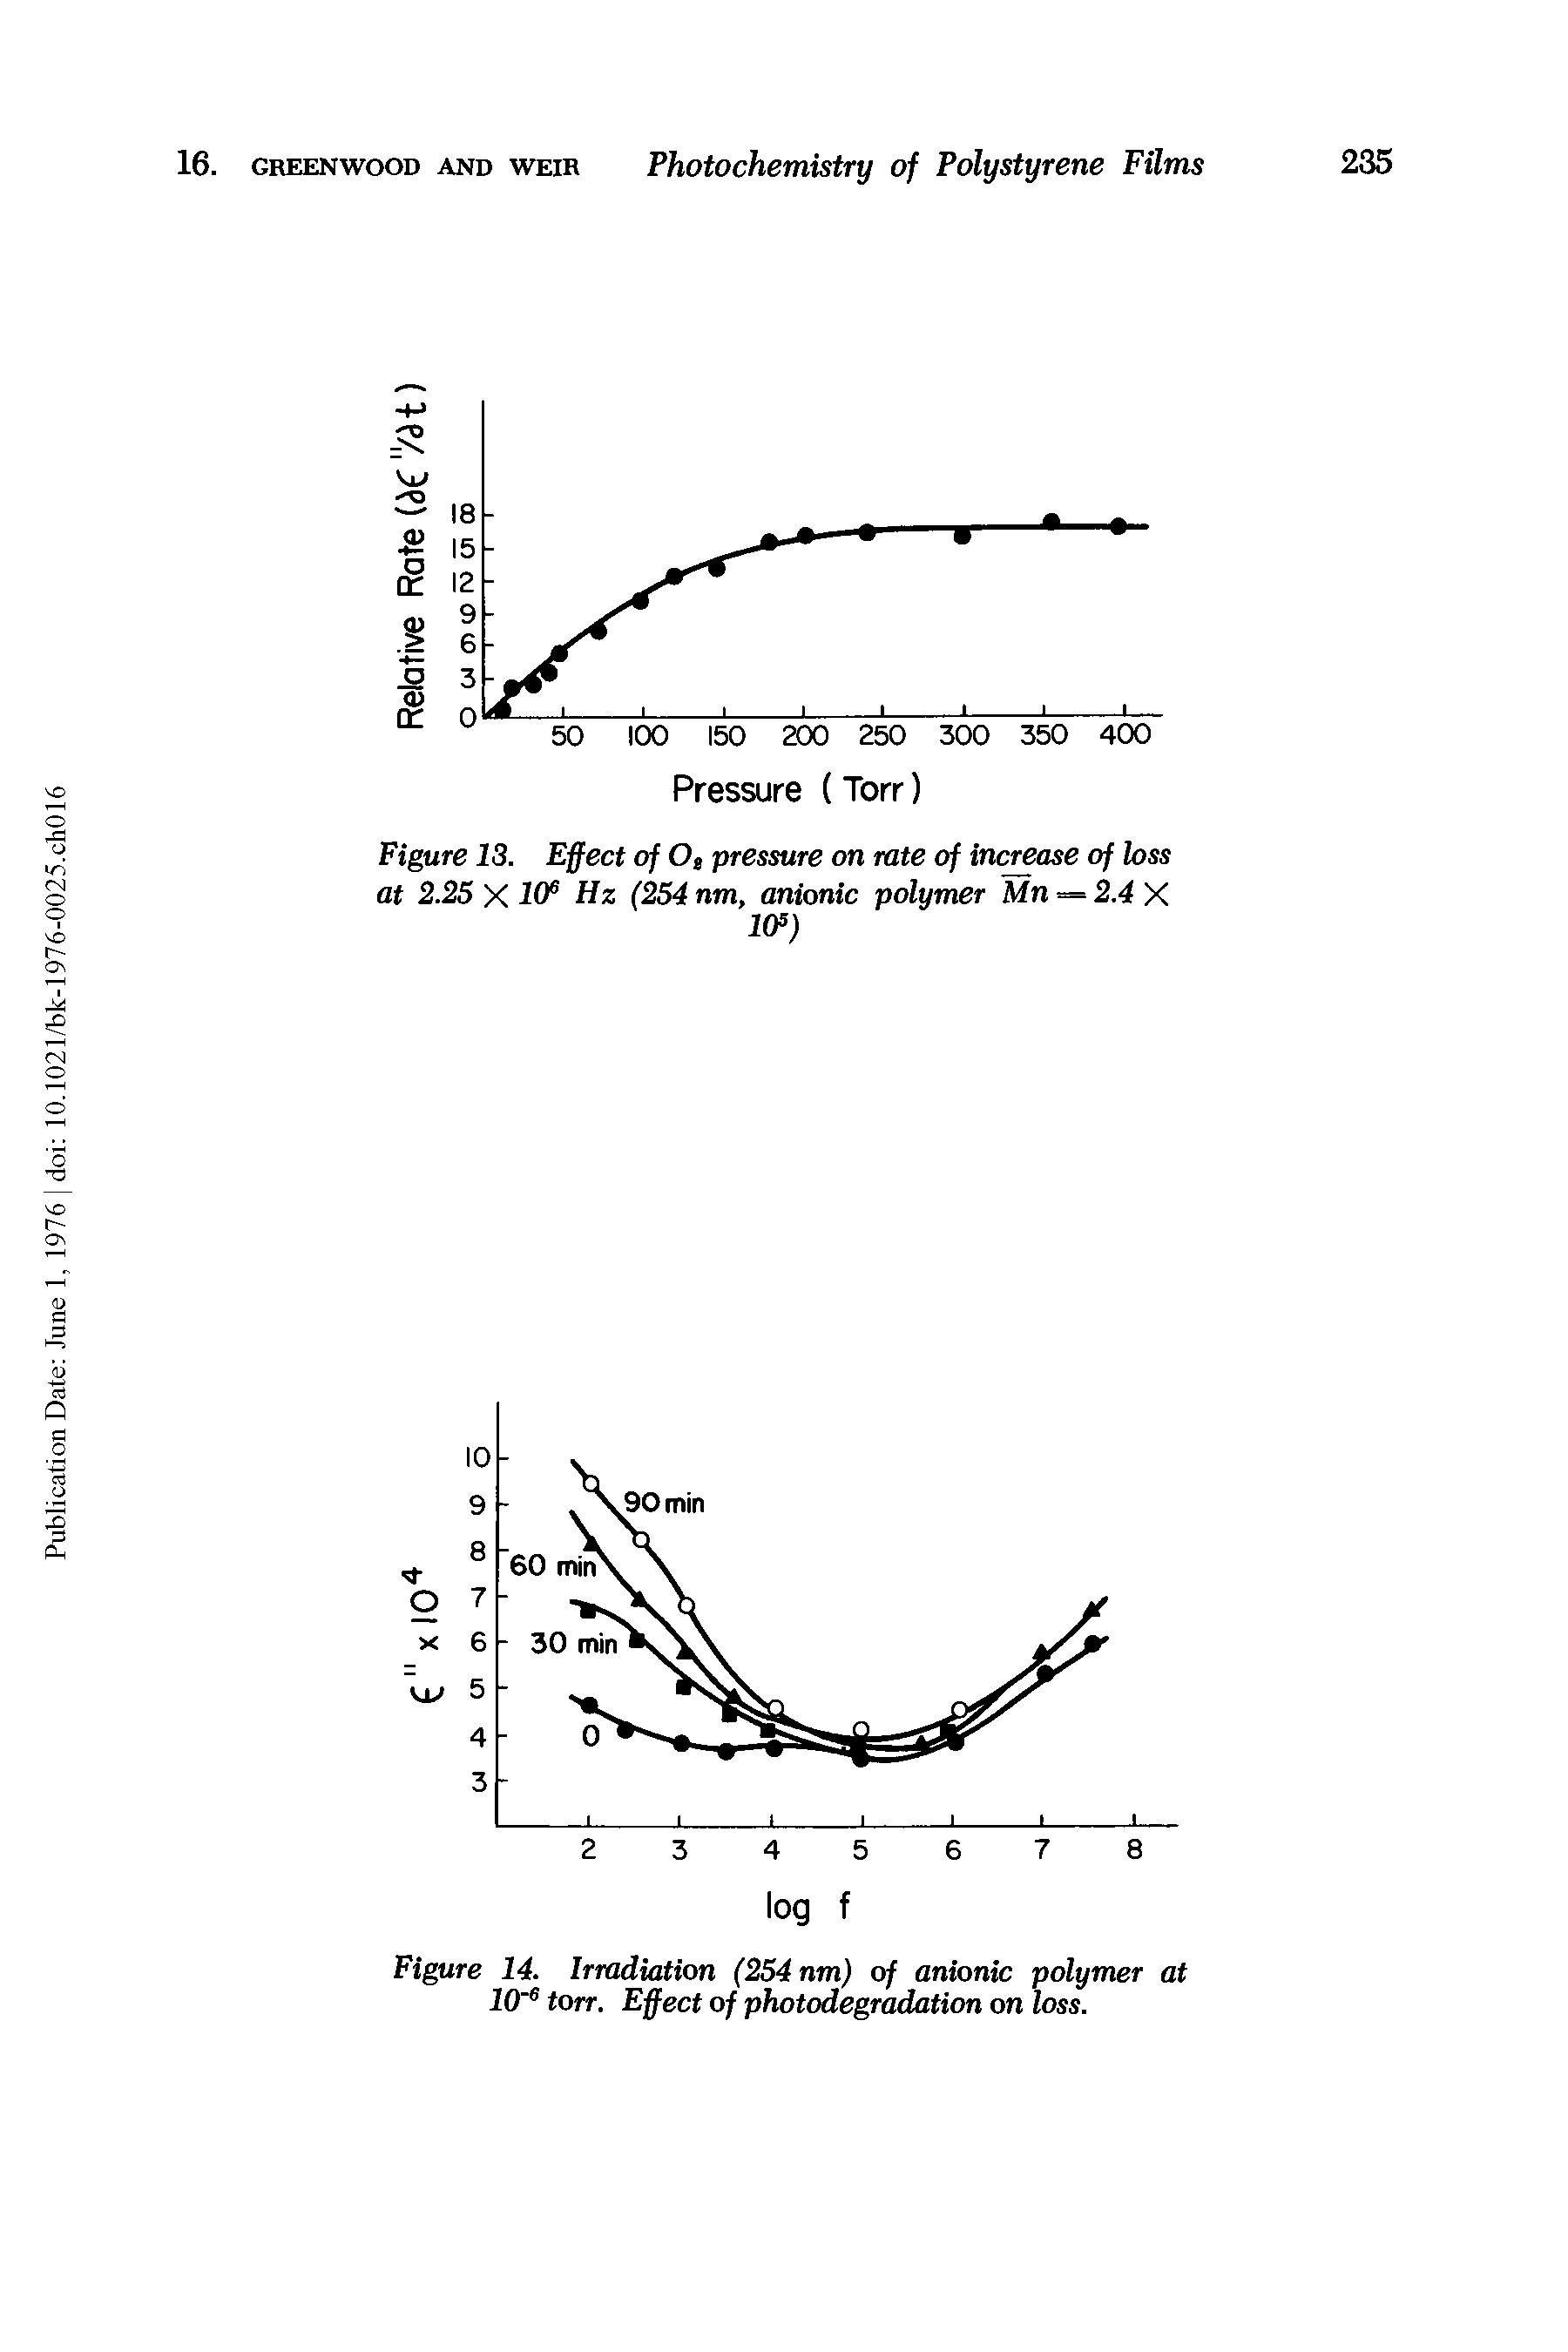 Figure 13. Effect of Oj pressure on rate of increase of loss at 2.25 X 1(F Hz (254 nm, anionic polymer Mn = 2.4 X 1(F)...